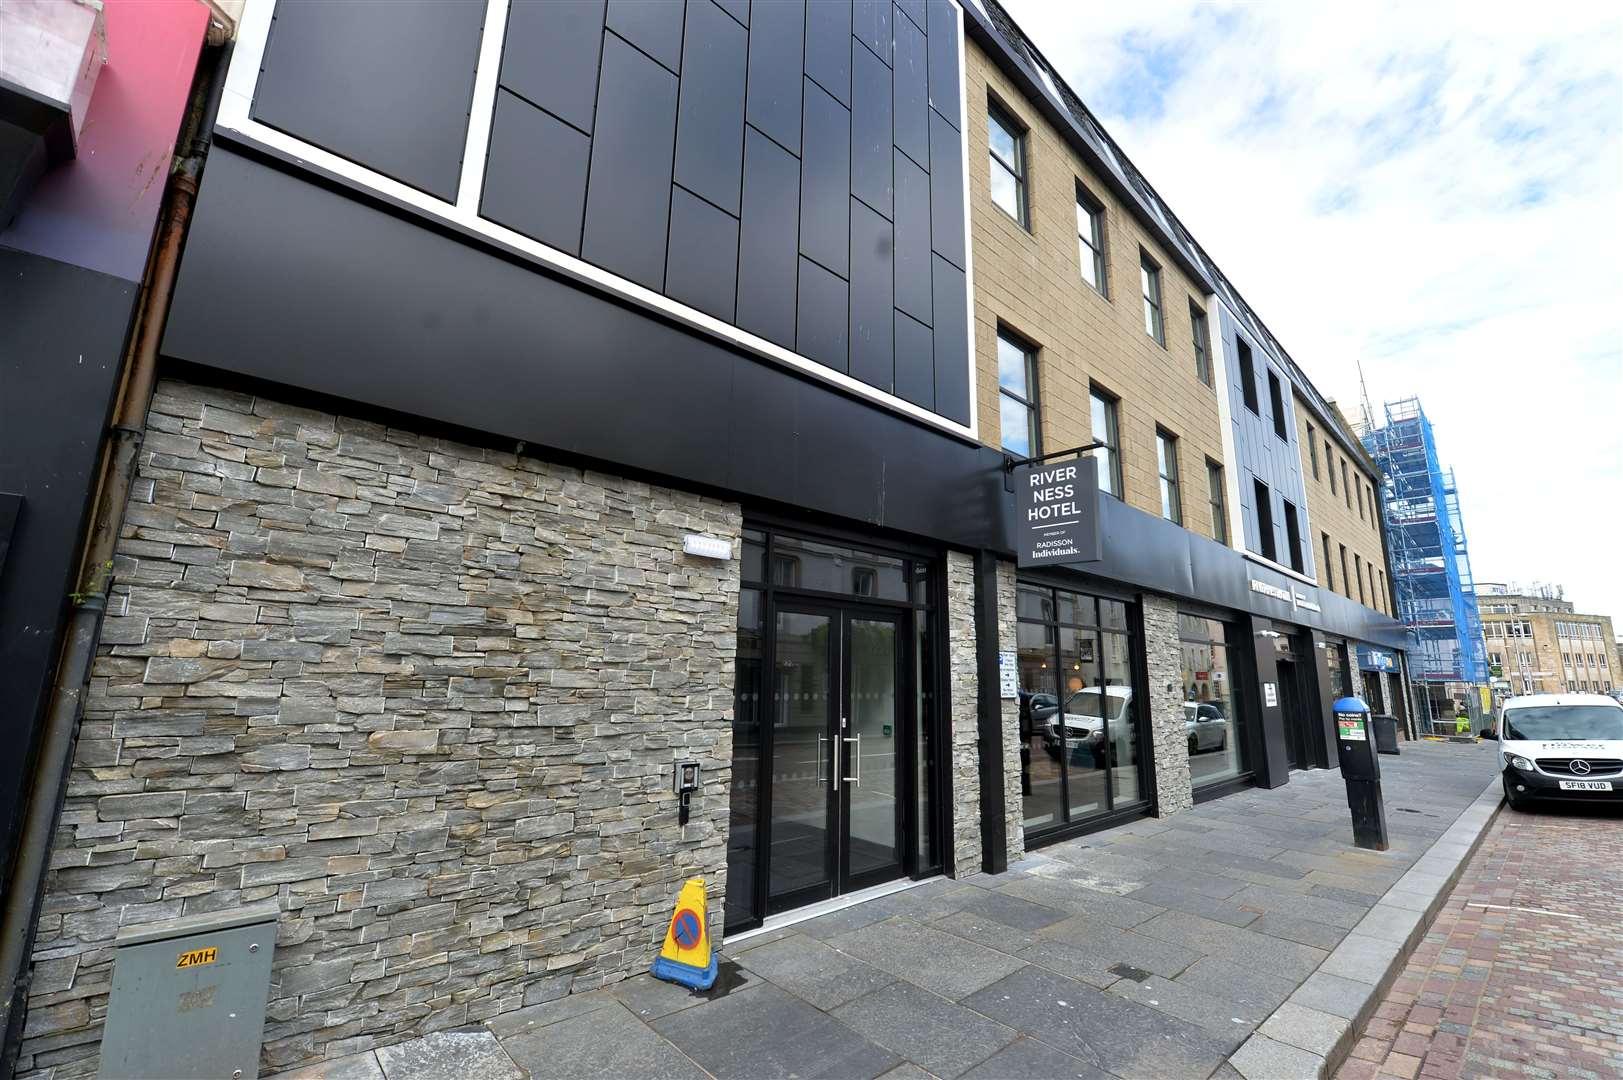 The new River Ness Hotel on Church Street is one of a number of positive new developments in Inverness city centre.